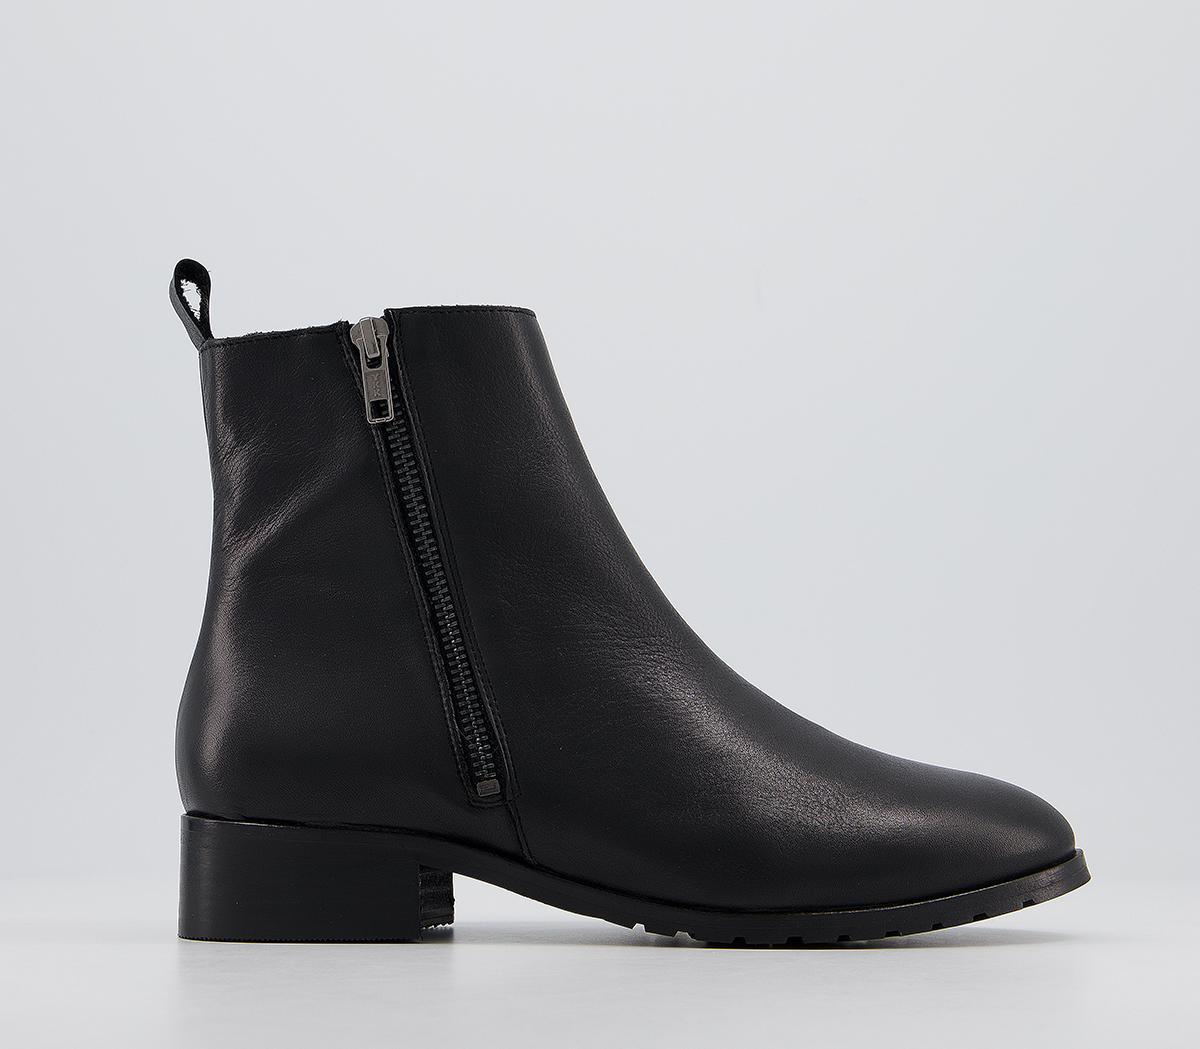 OFFICE Advanced Cleated Side Zip Boots Black Leather - Women's Ankle Boots